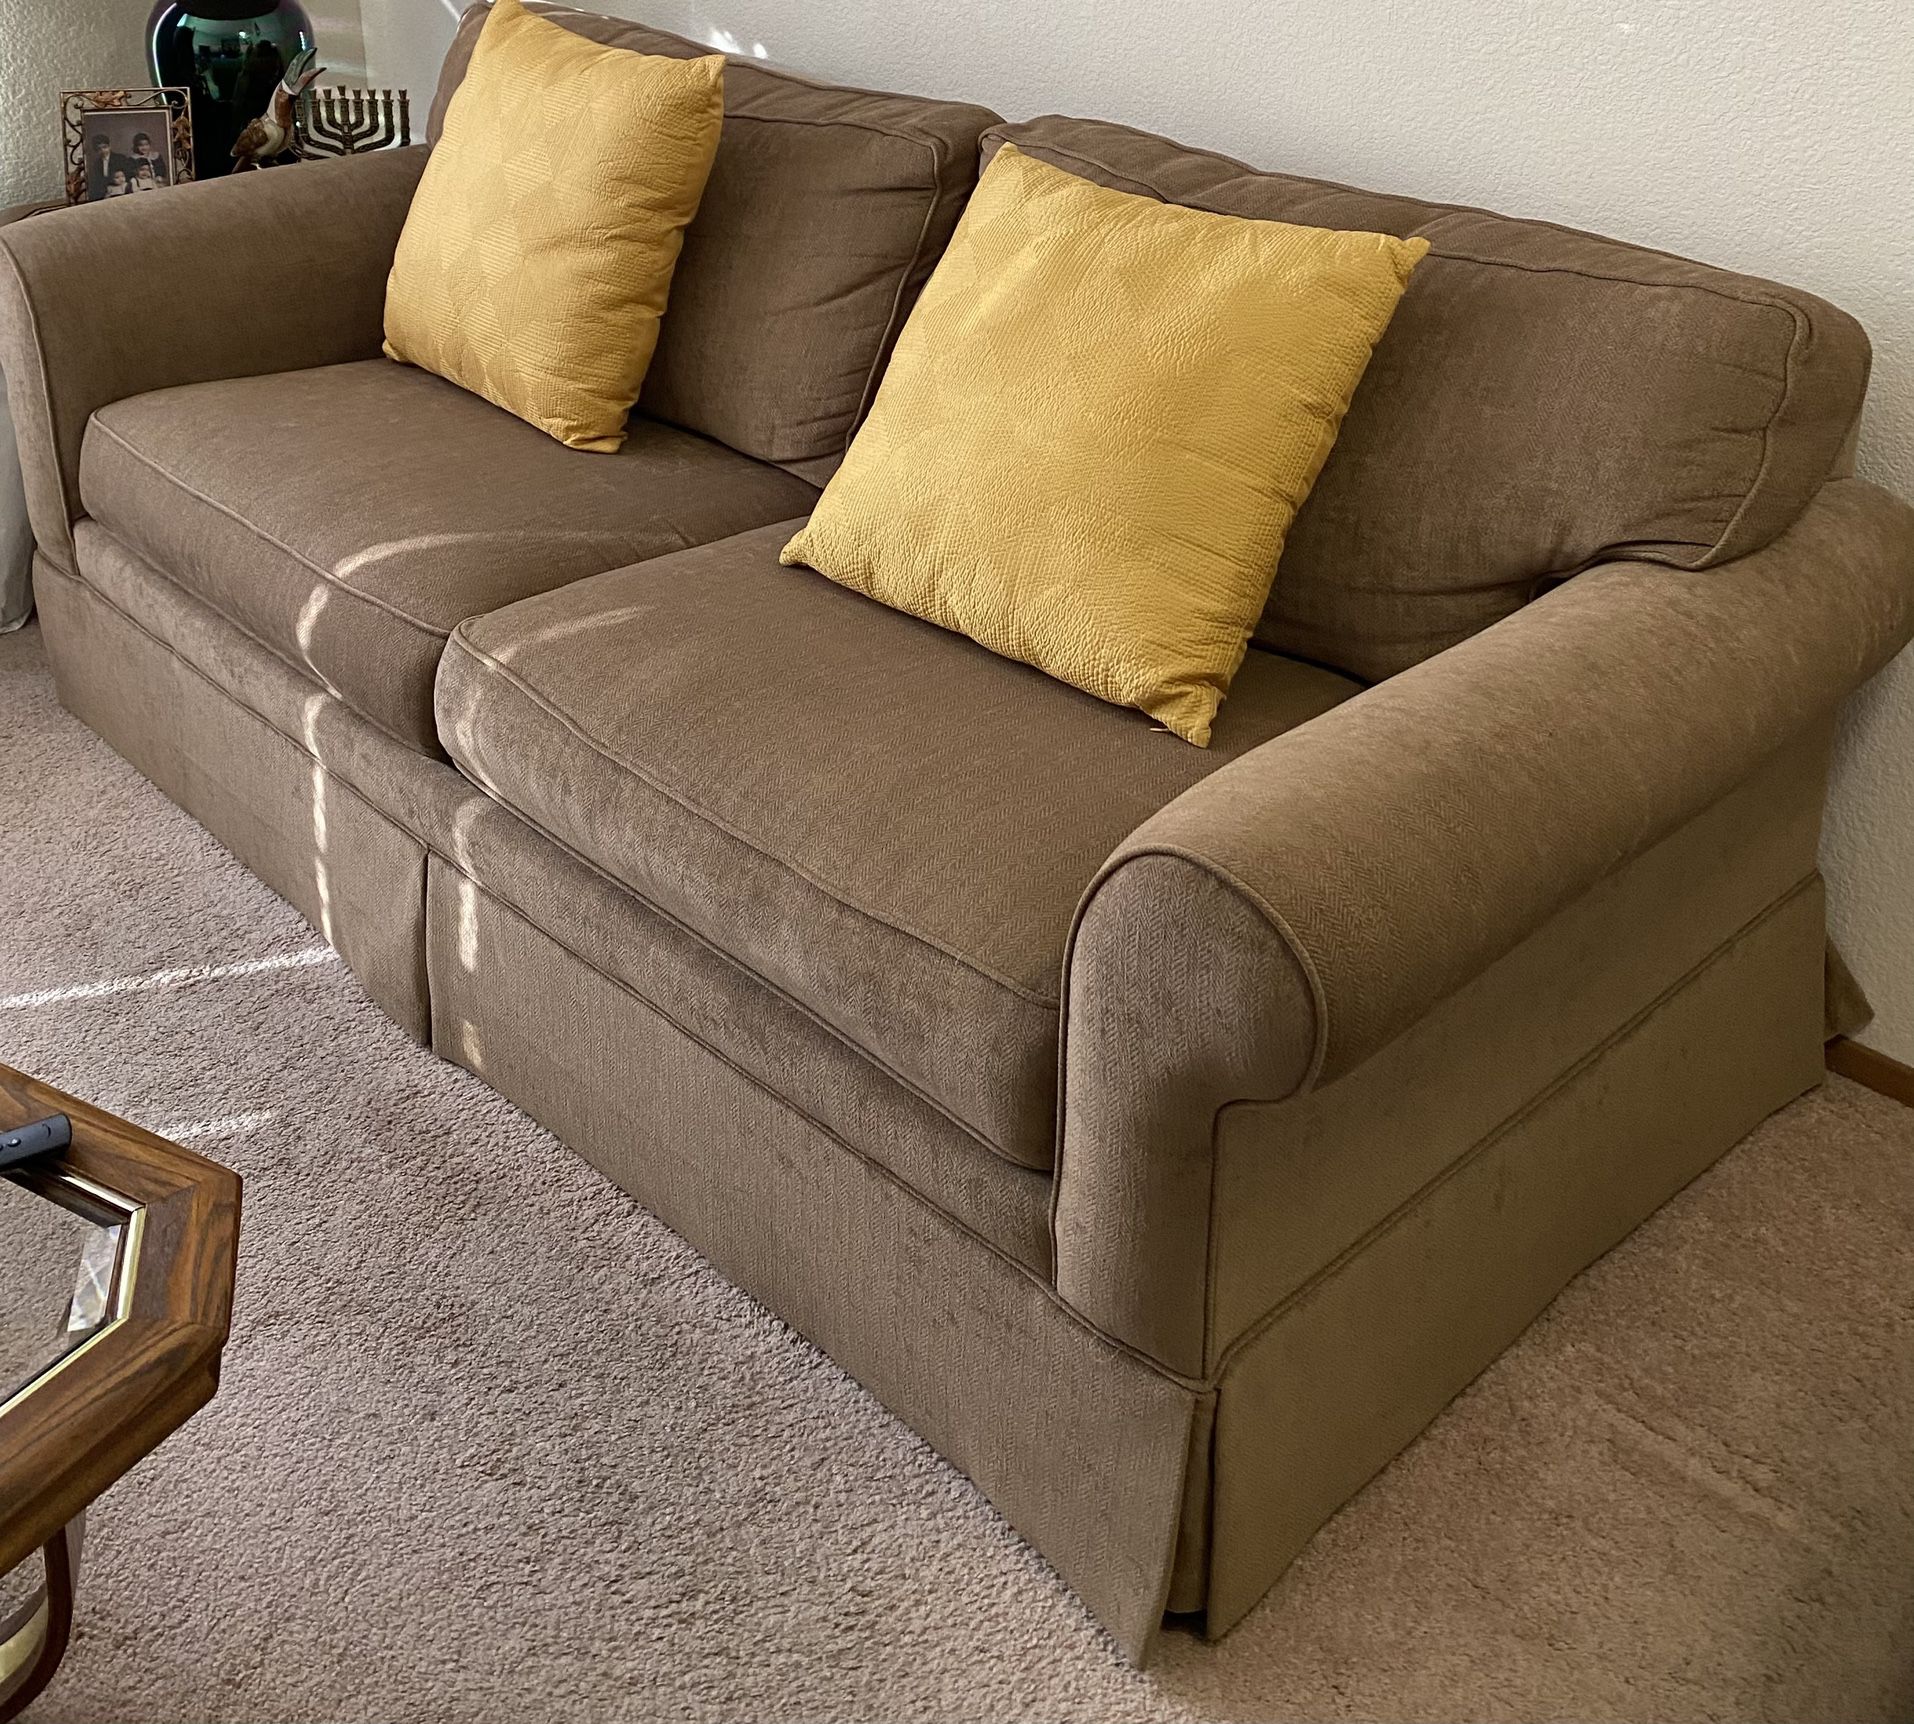 Sofa With Built-In Sleeper And Built-In Electric Pump